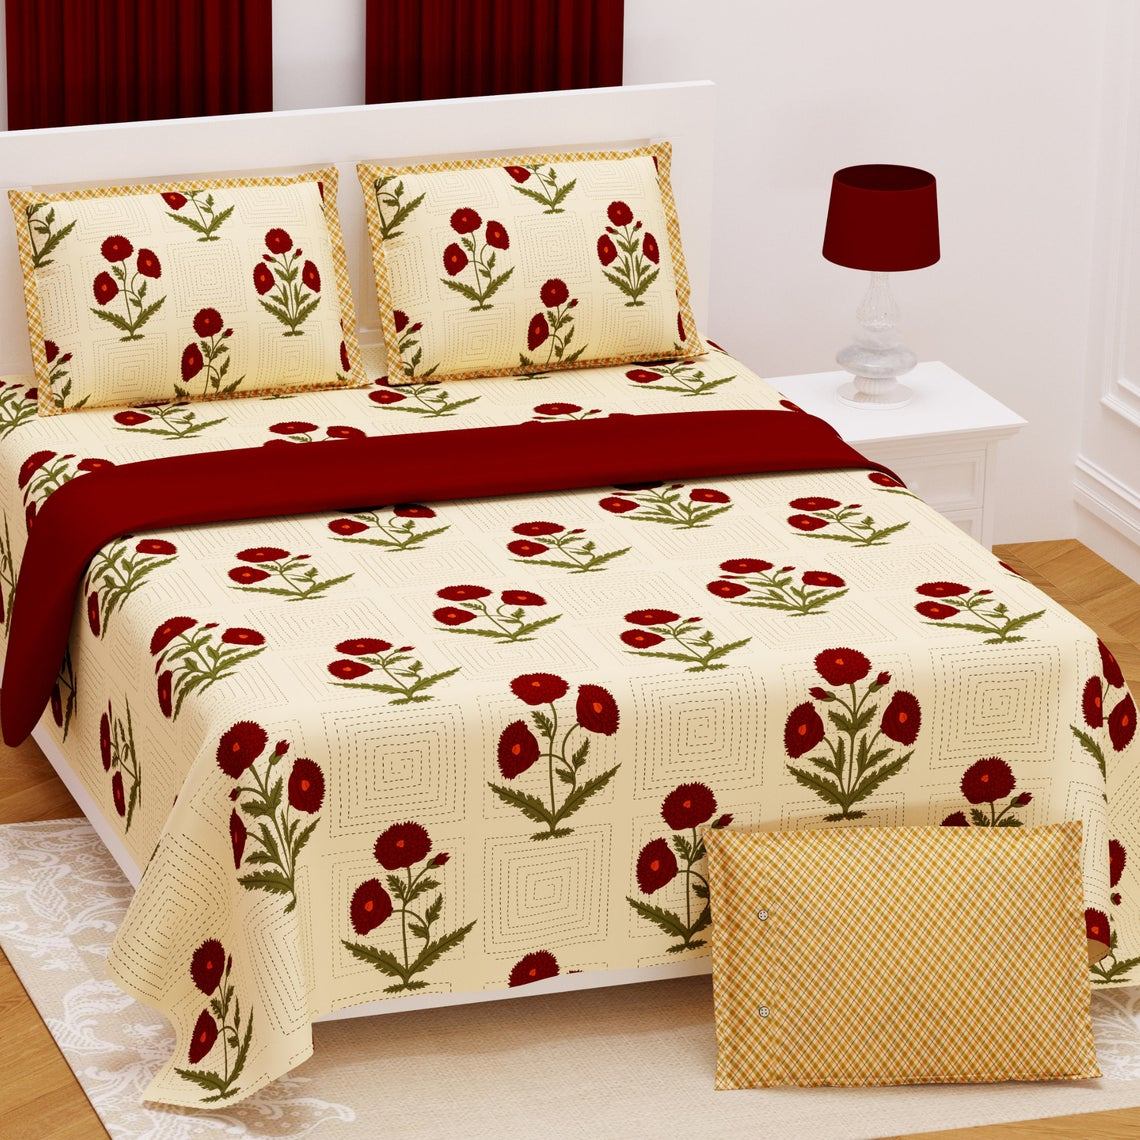 Buy Red Rose Floral Printed King Size Bed Sheets With Set of 2 Pillow Covers